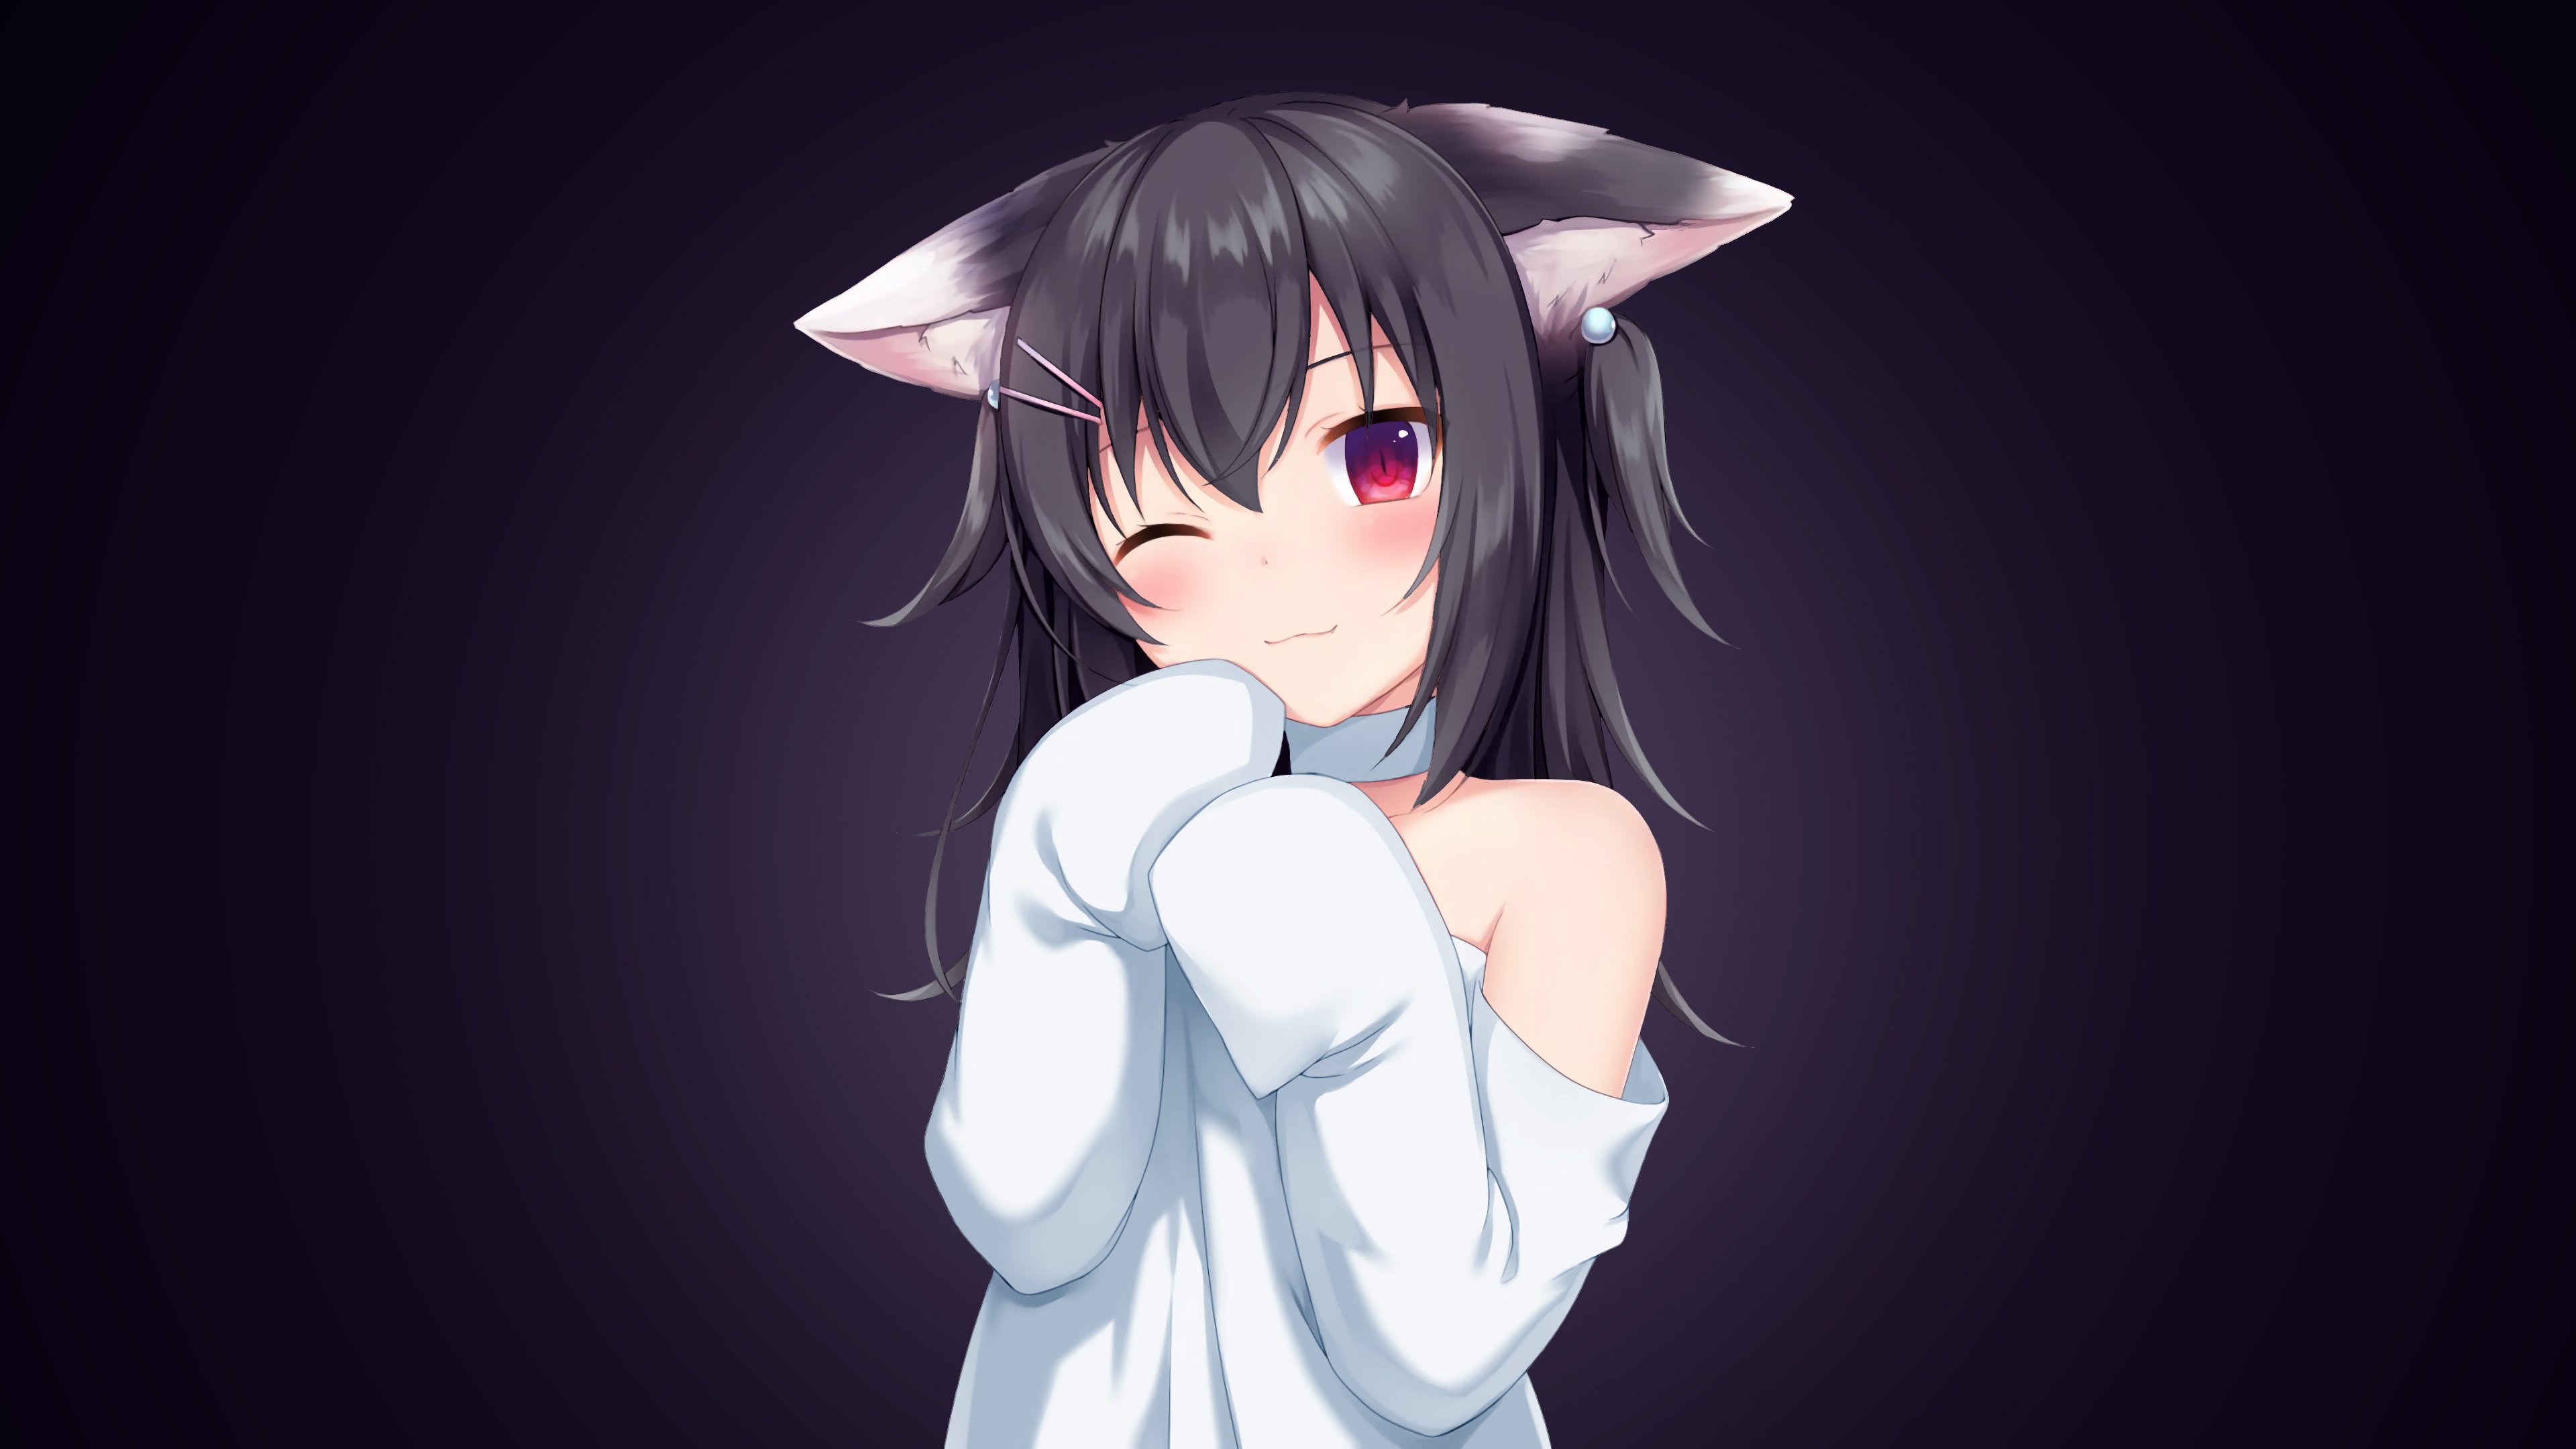 Anime girl with cat ears Desktop wallpapers 1366x768